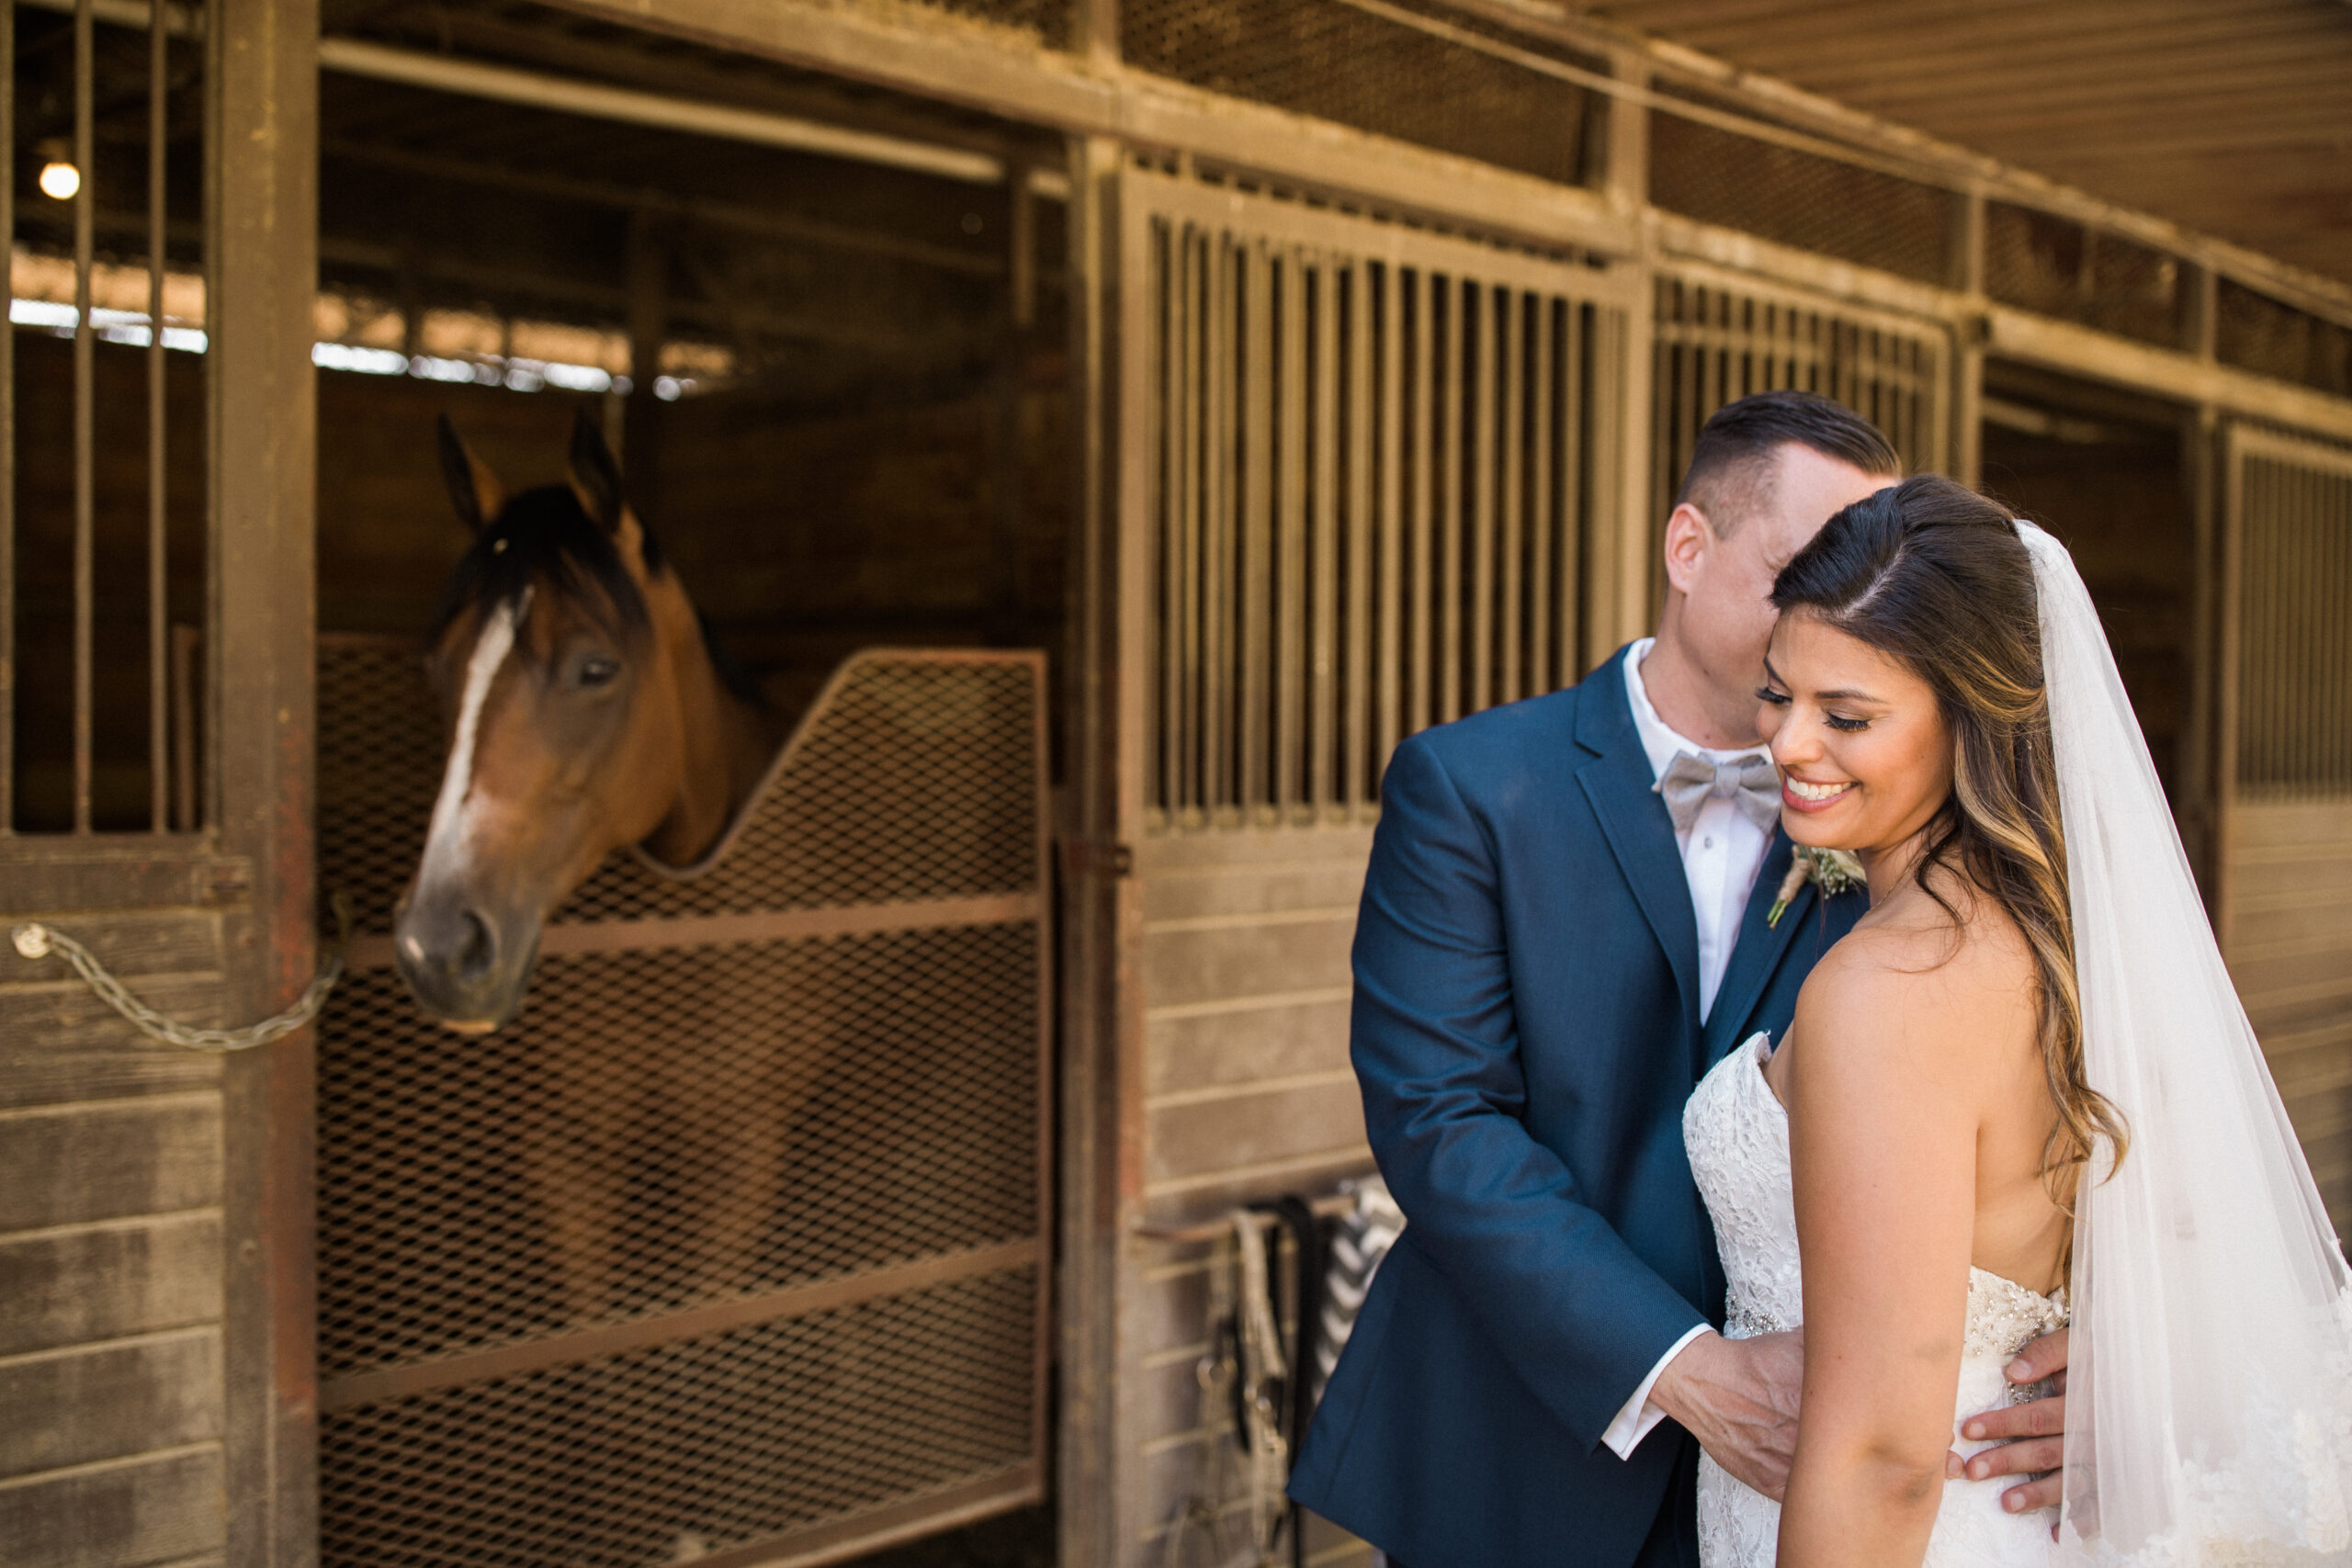 Groom whispers into his smiling Bride's ear in front of a horse in a stable at The Red Horse Barn wedding venue in Huntington Beach.